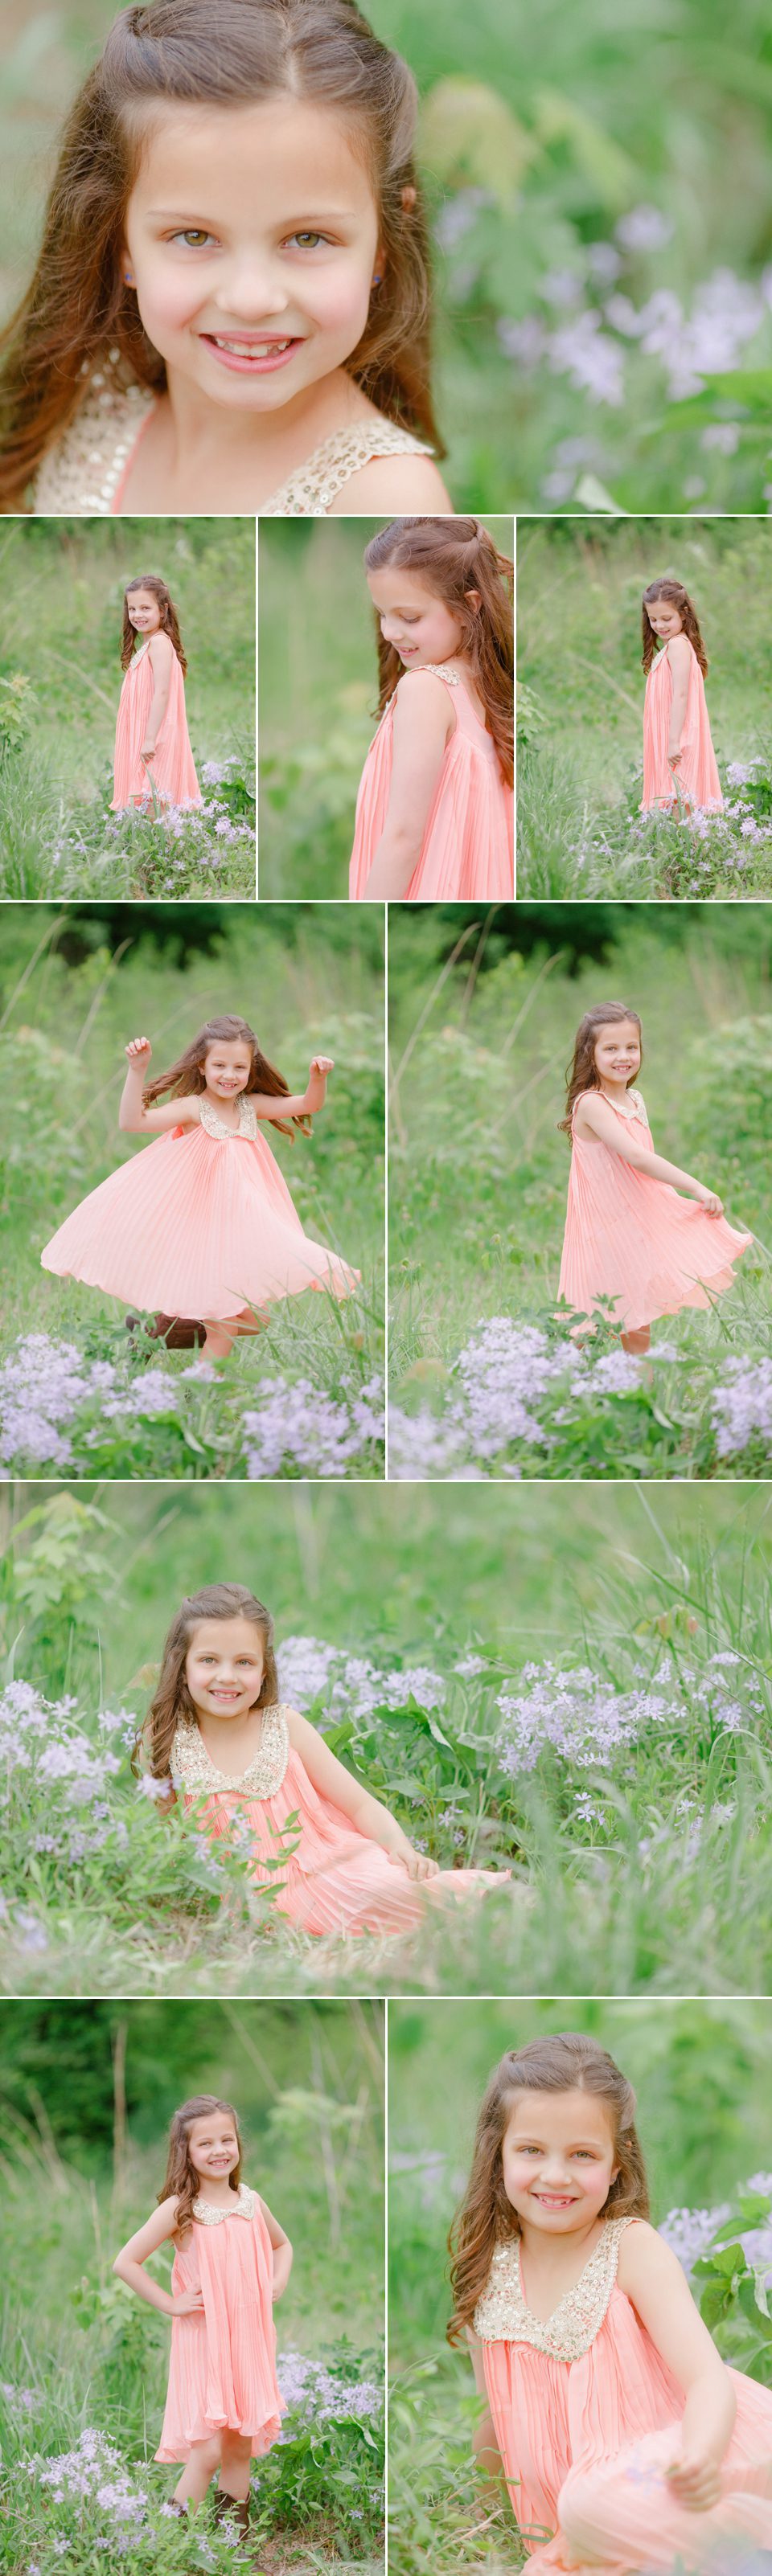 Photos of a tween girl in field of purple flowers taken by kids photographer based out of Athens GA.